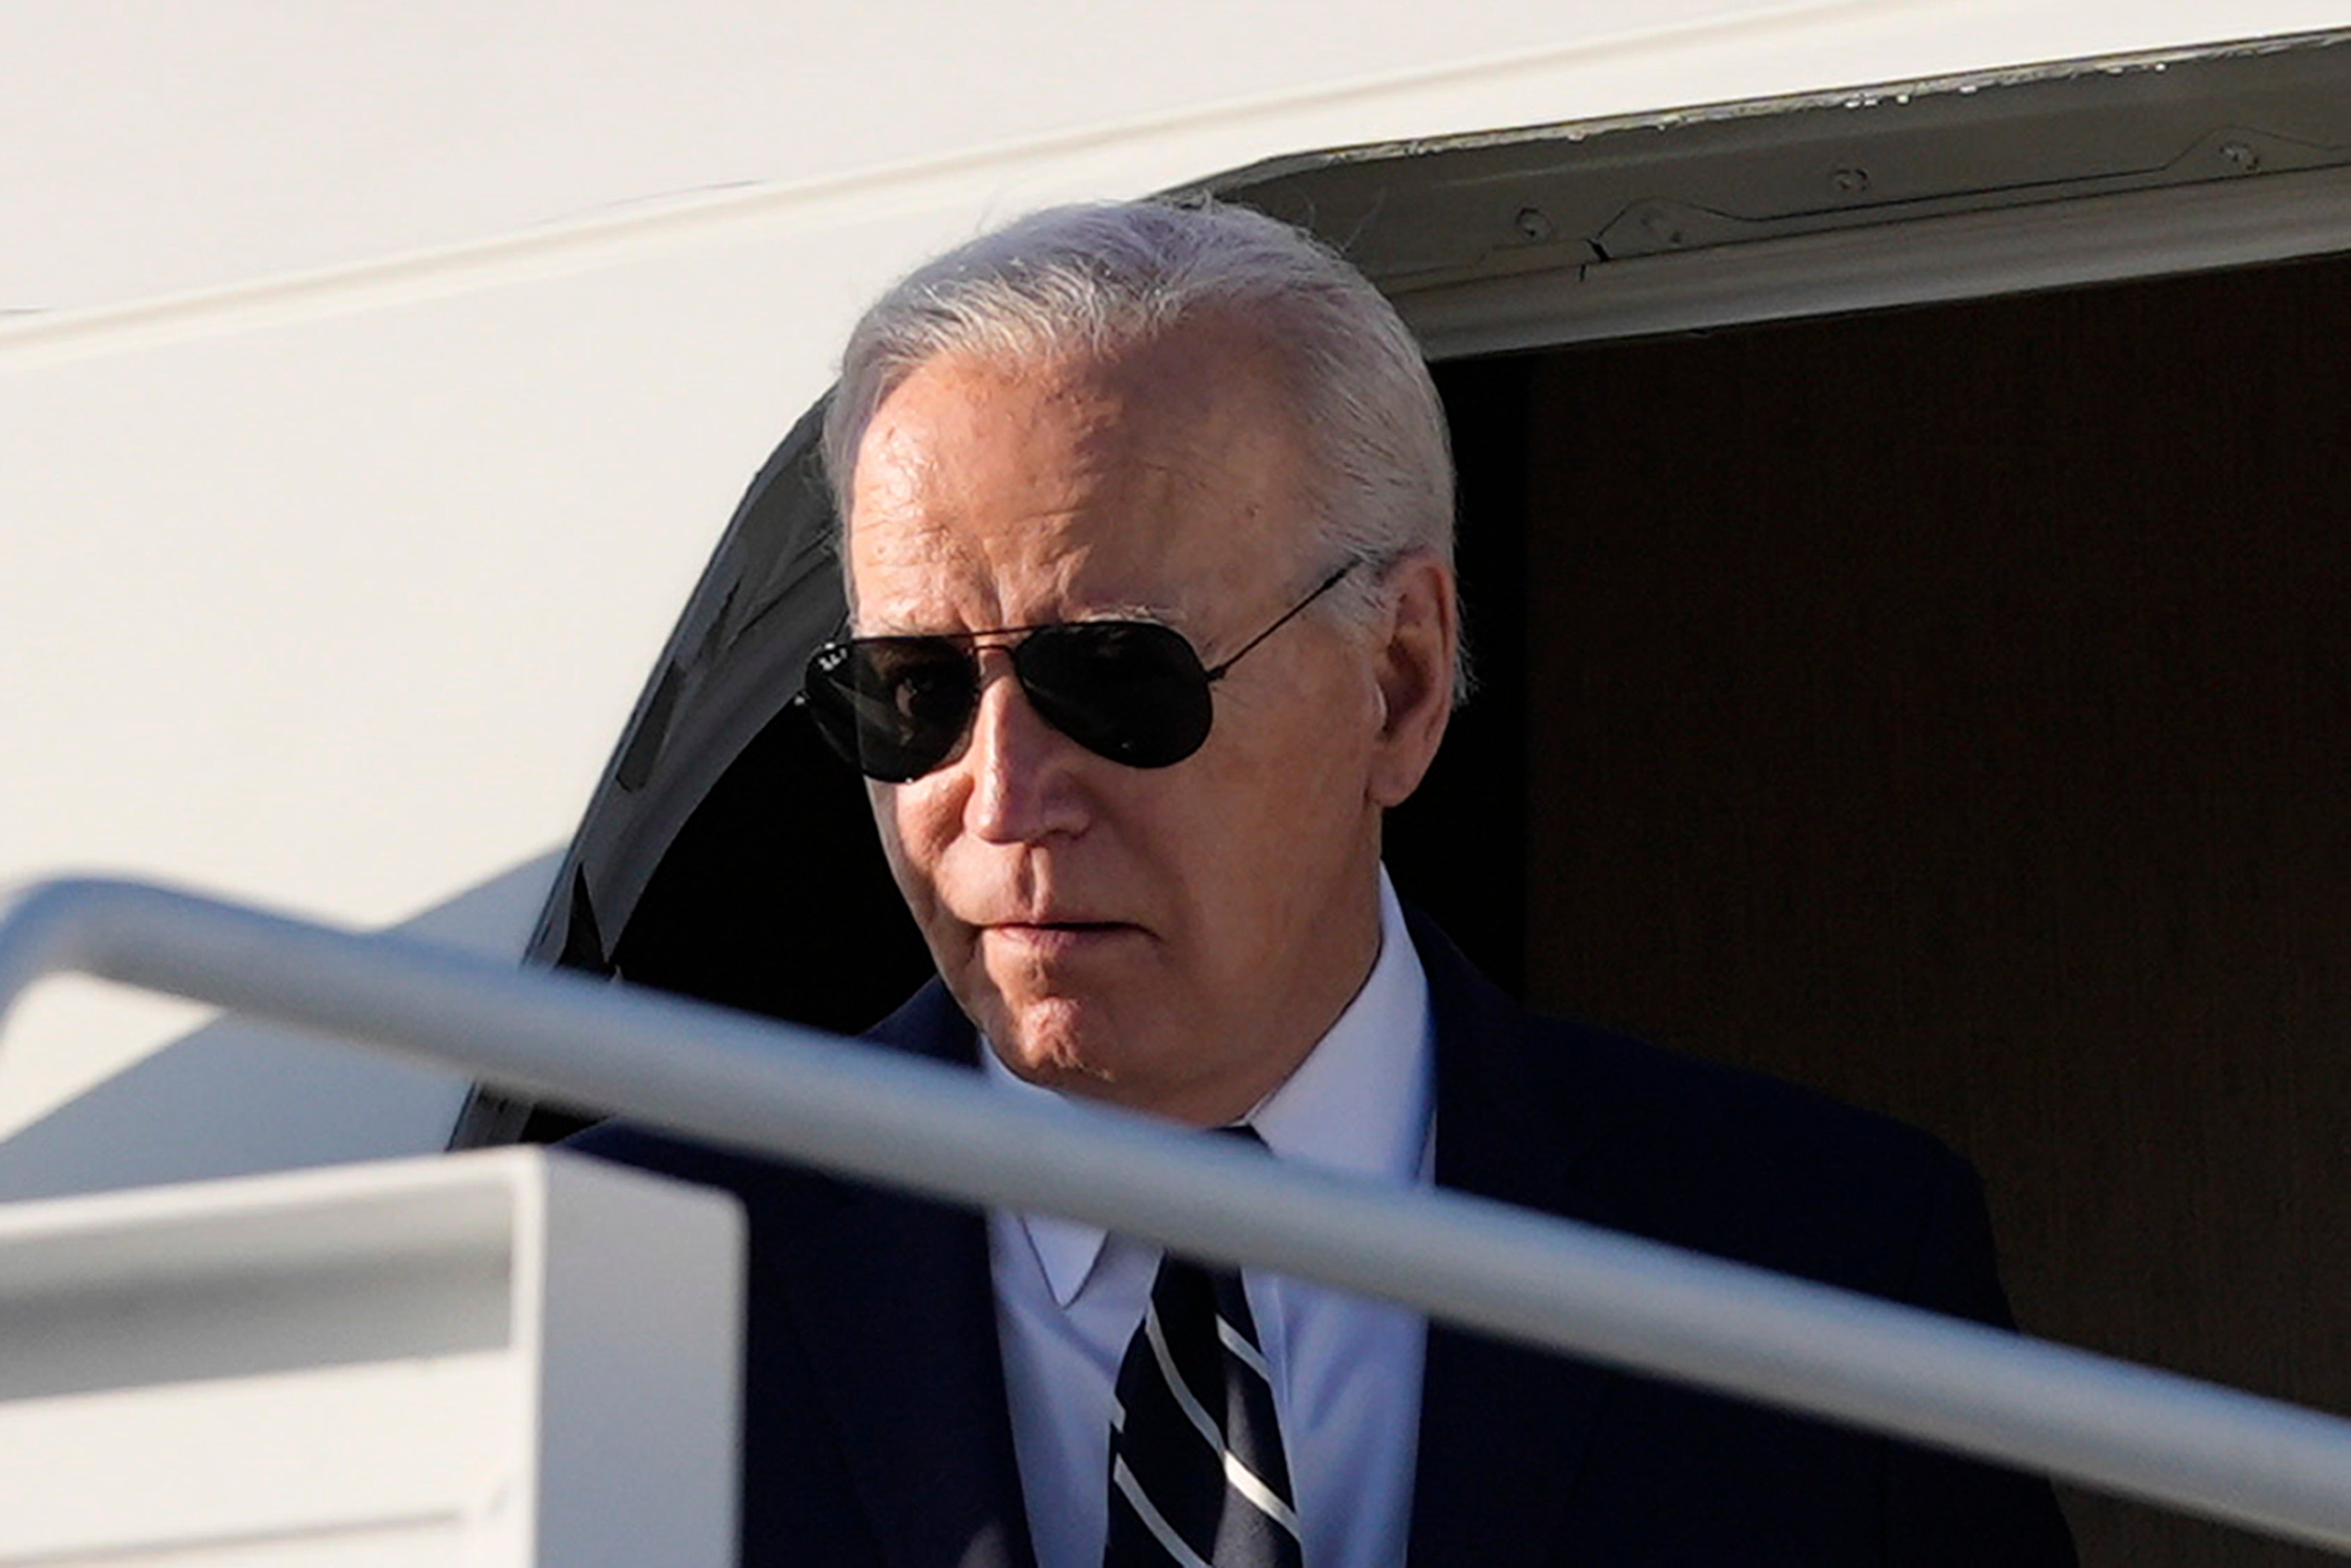 Joe Biden reportedly told Netanyahu to ‘take the win’ as he cautioned against striking back against Iran